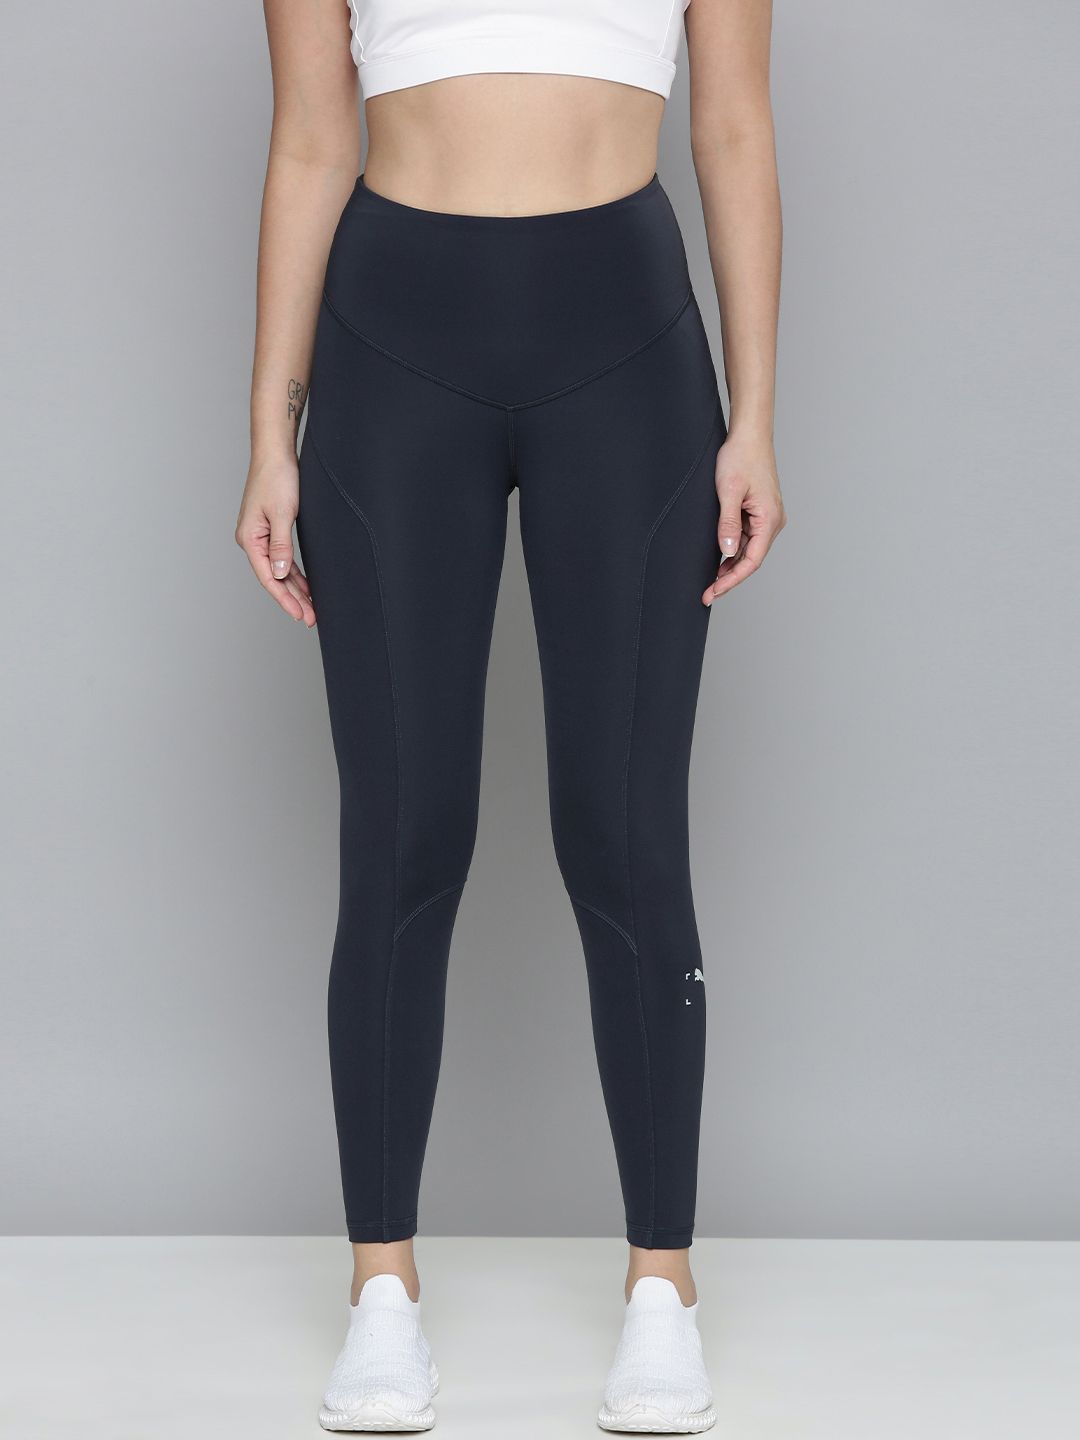 Puma Women Black Solid RE.COLLECTION 7/8 Training Tights Price in India